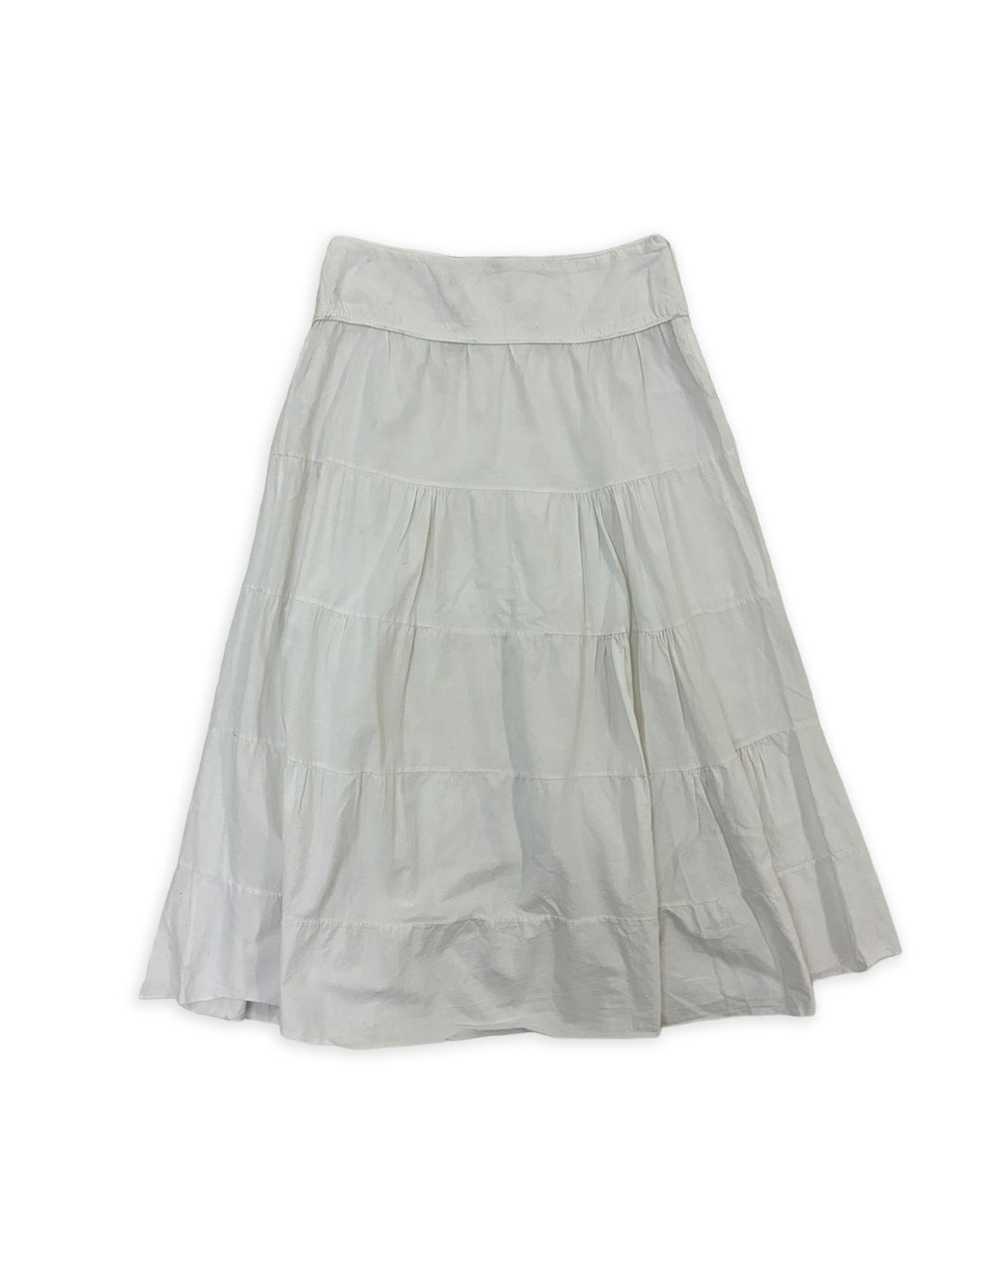 WHITE TIERED MAXI SKIRT (W30) - image 2